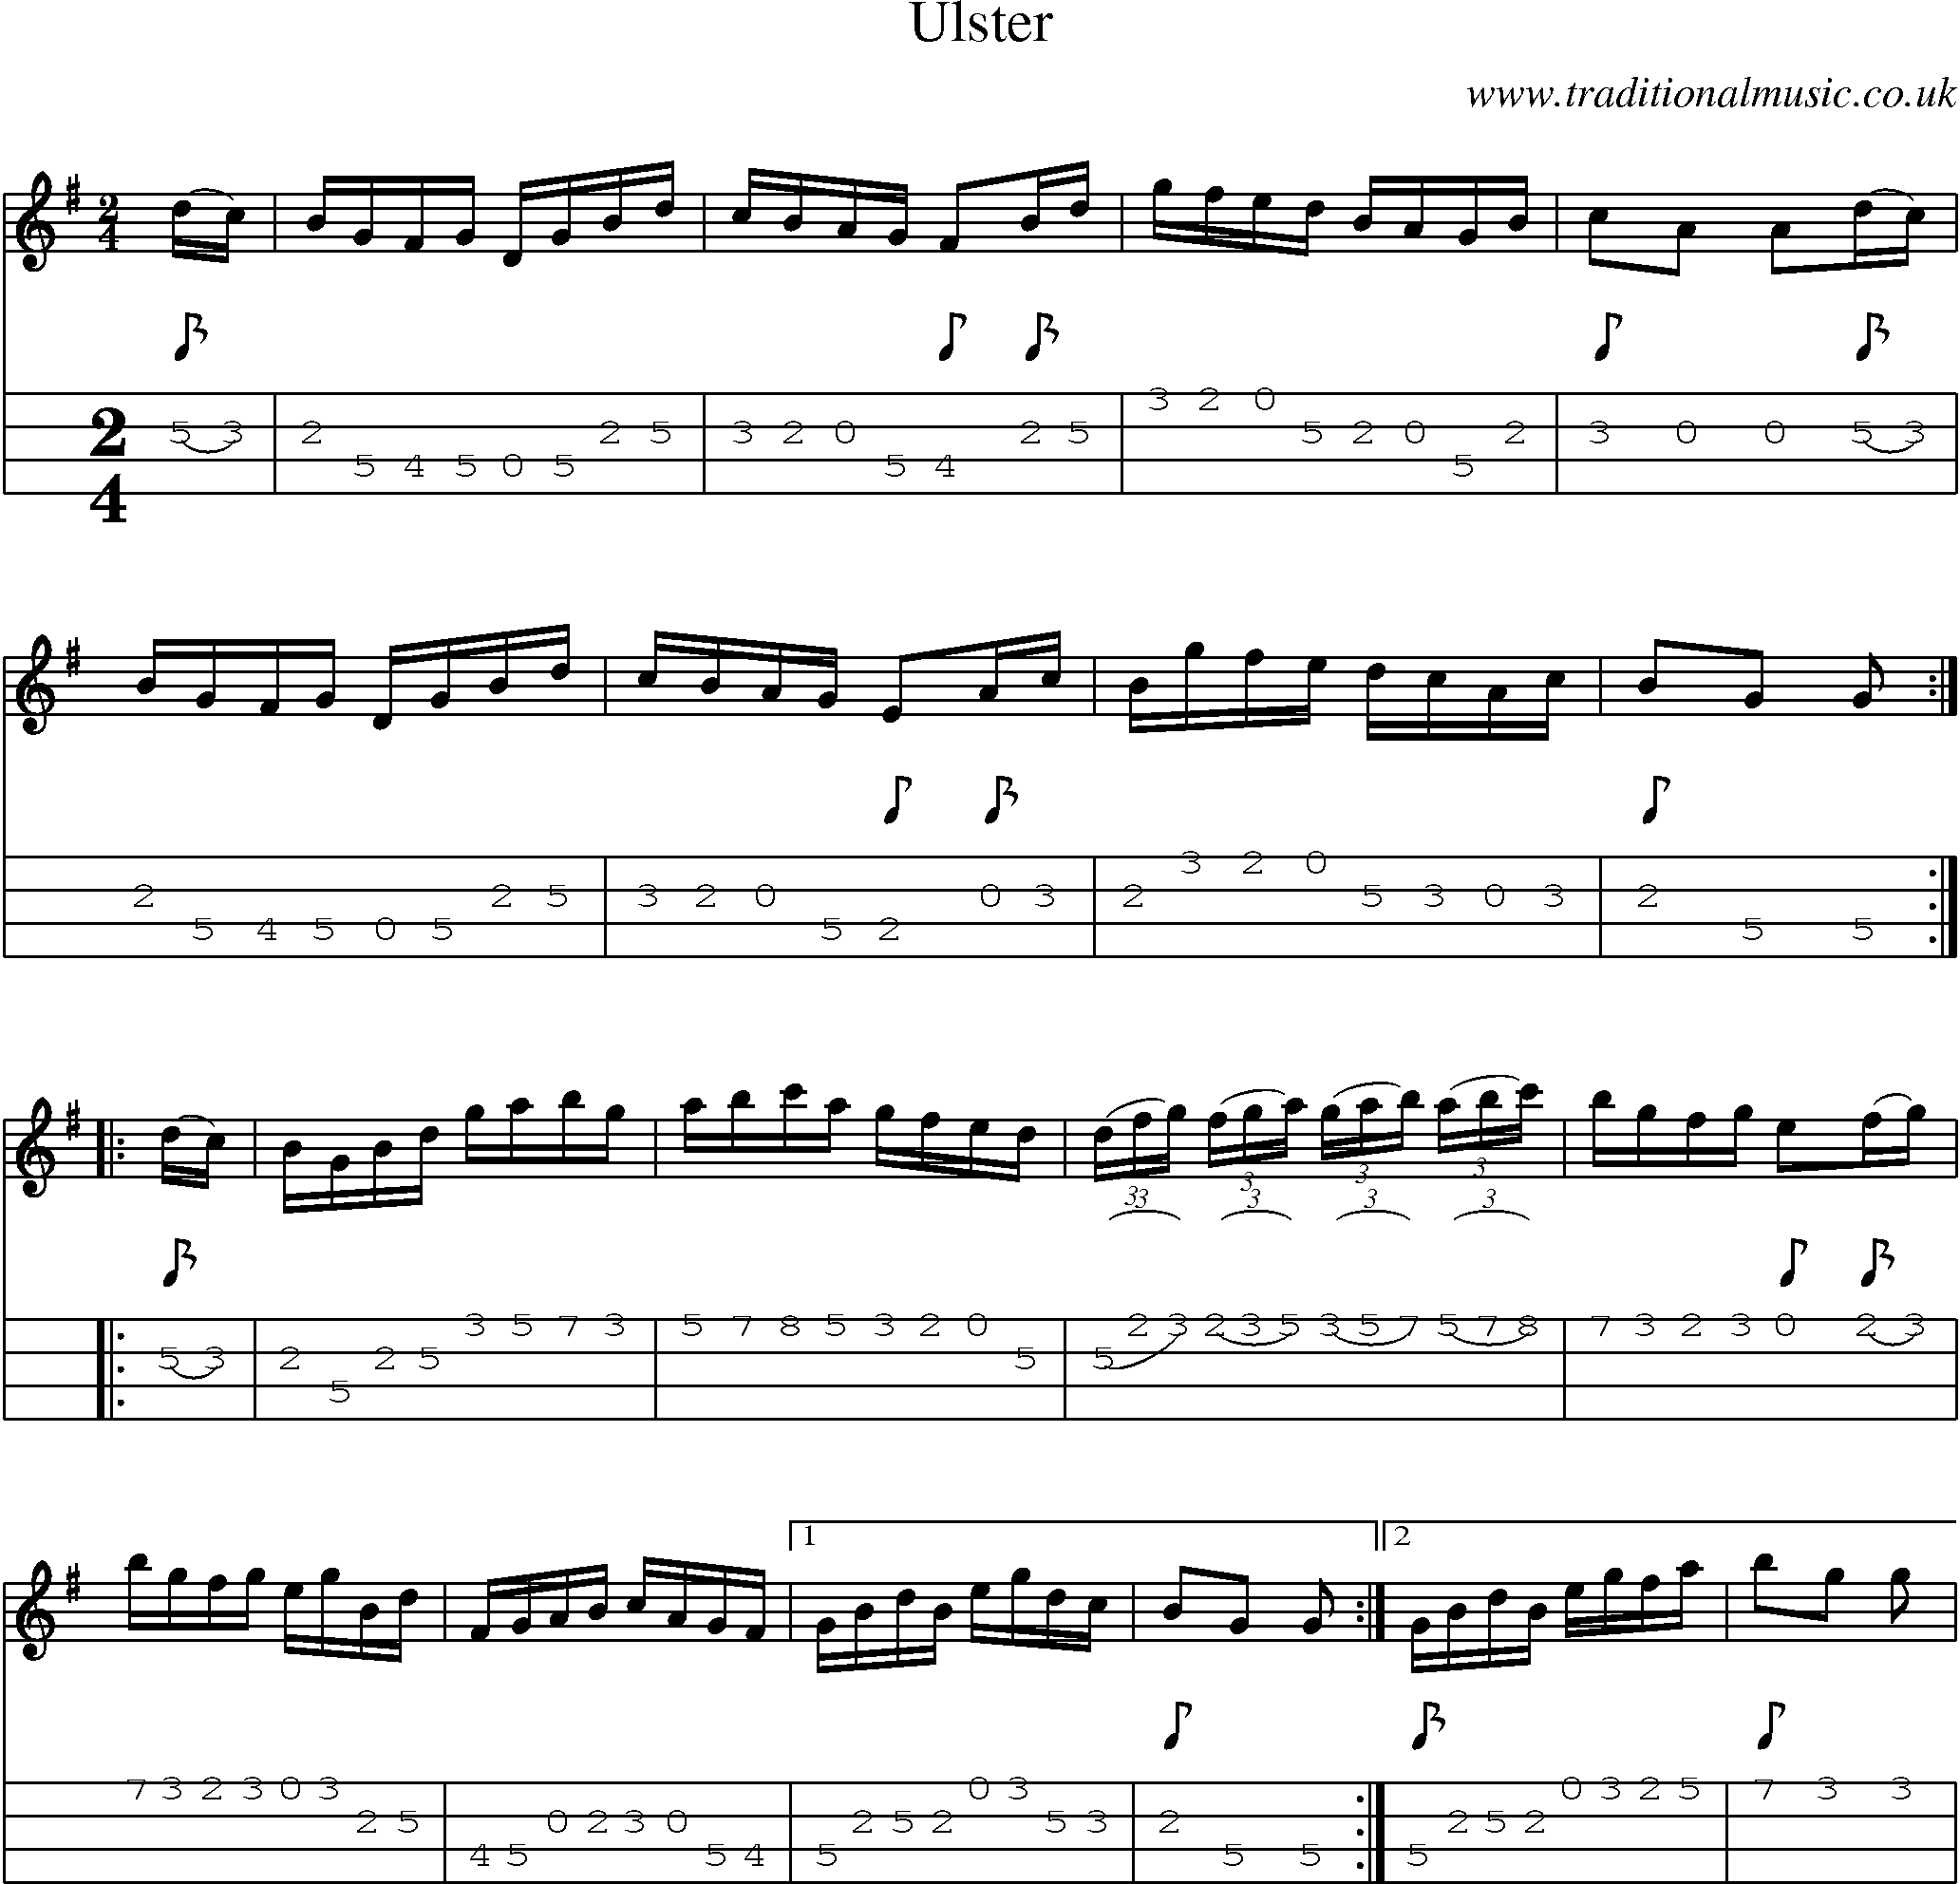 Music Score and Mandolin Tabs for Ulster